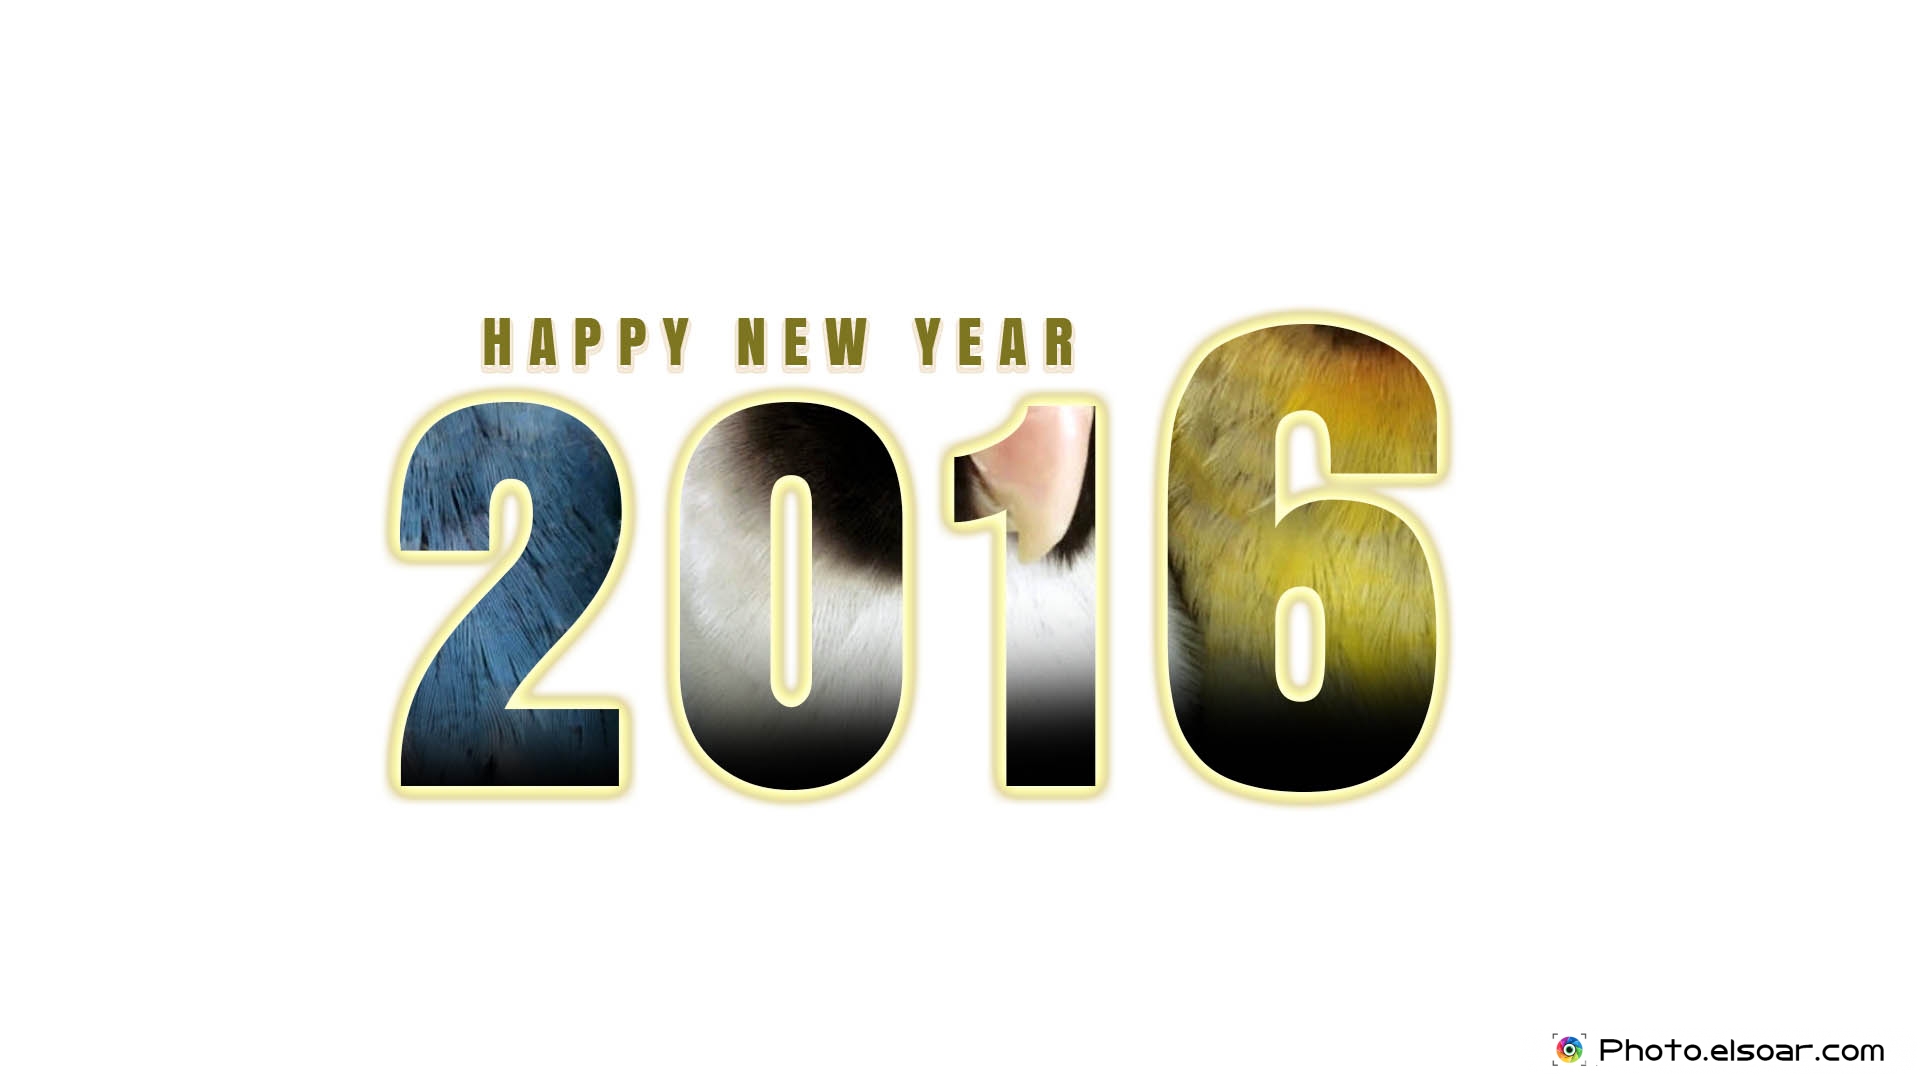 Happy New Year 2016 Images Wallpapers And Greeting Cards